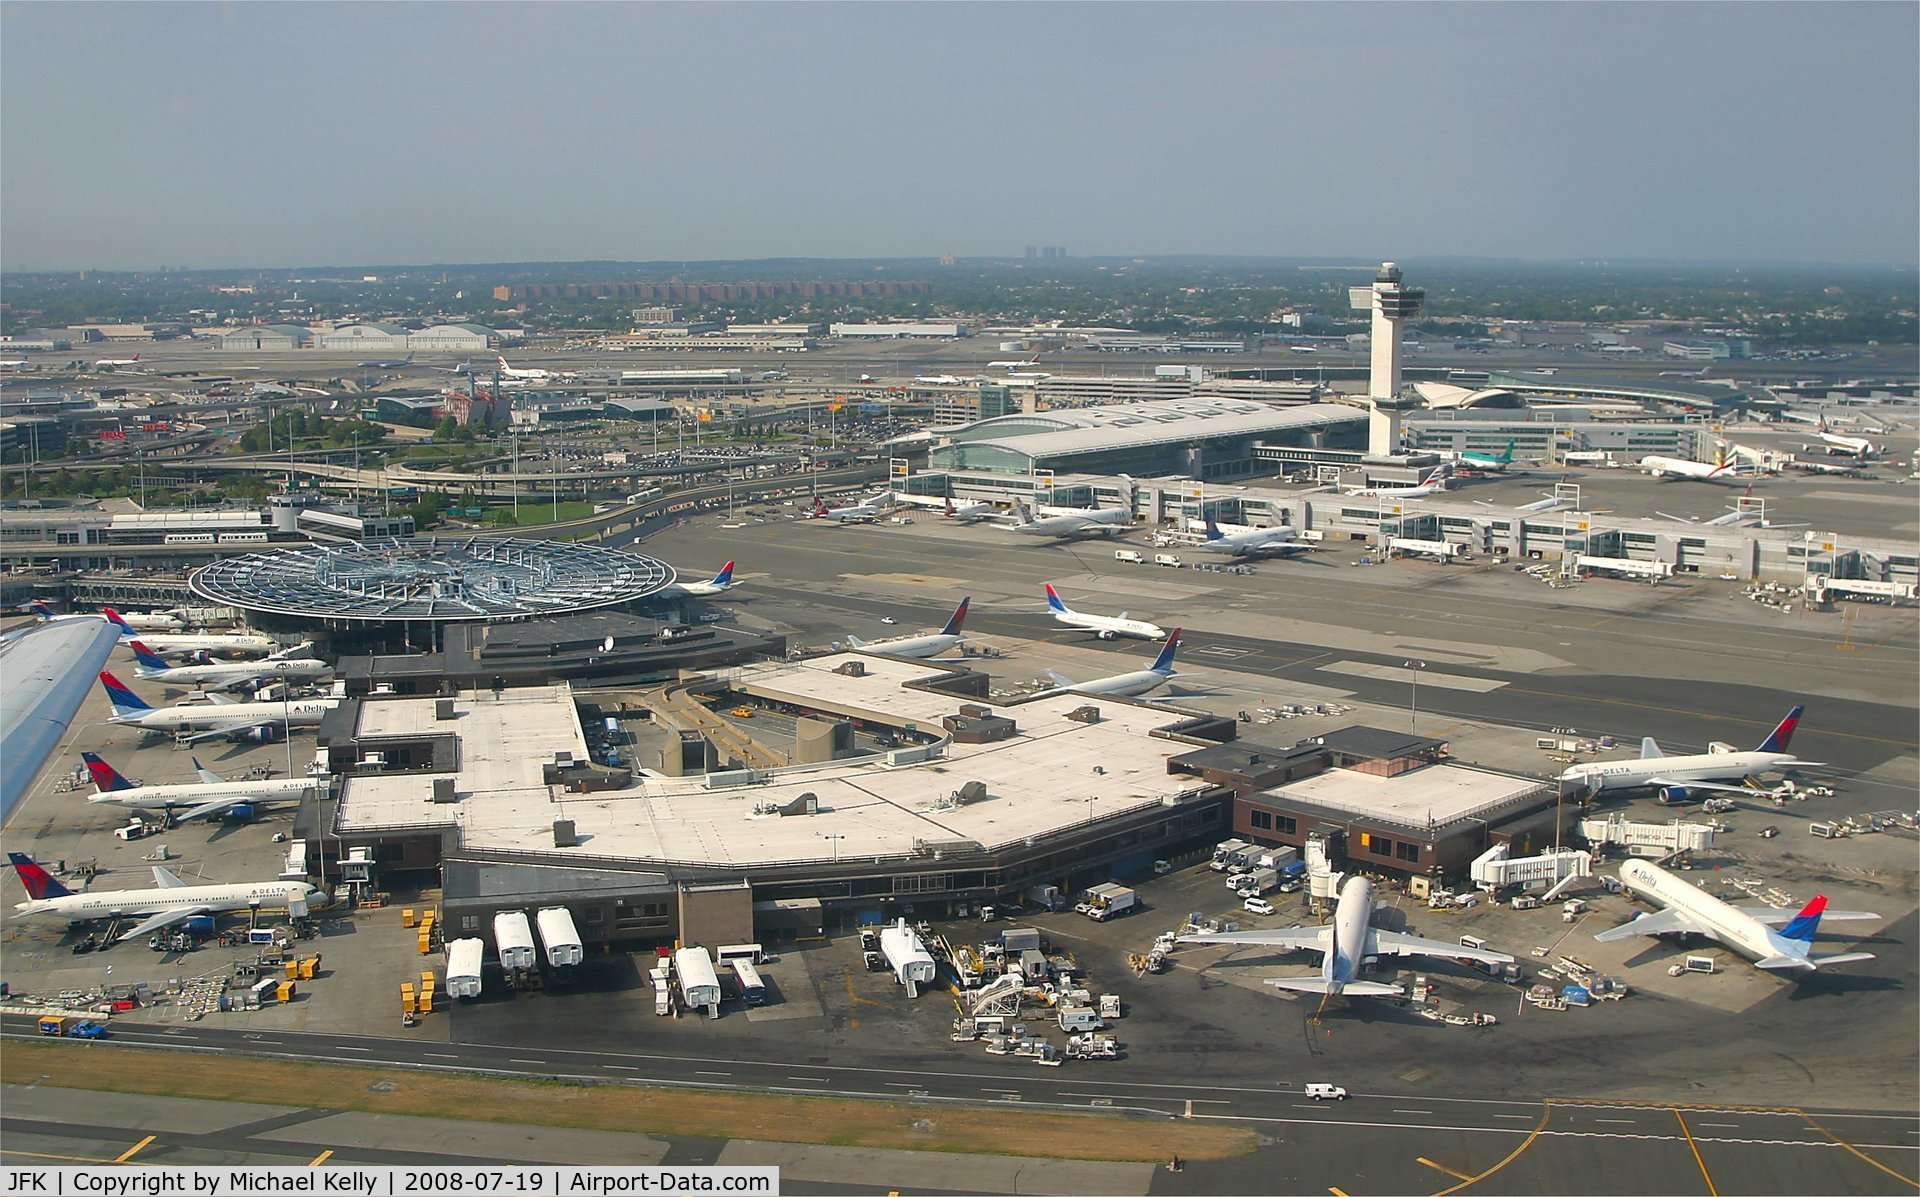 John F Kennedy International Airport (JFK) - Overview of JFK airport with Aer Lingus A330 EI-ORD parked up at Terminal 4